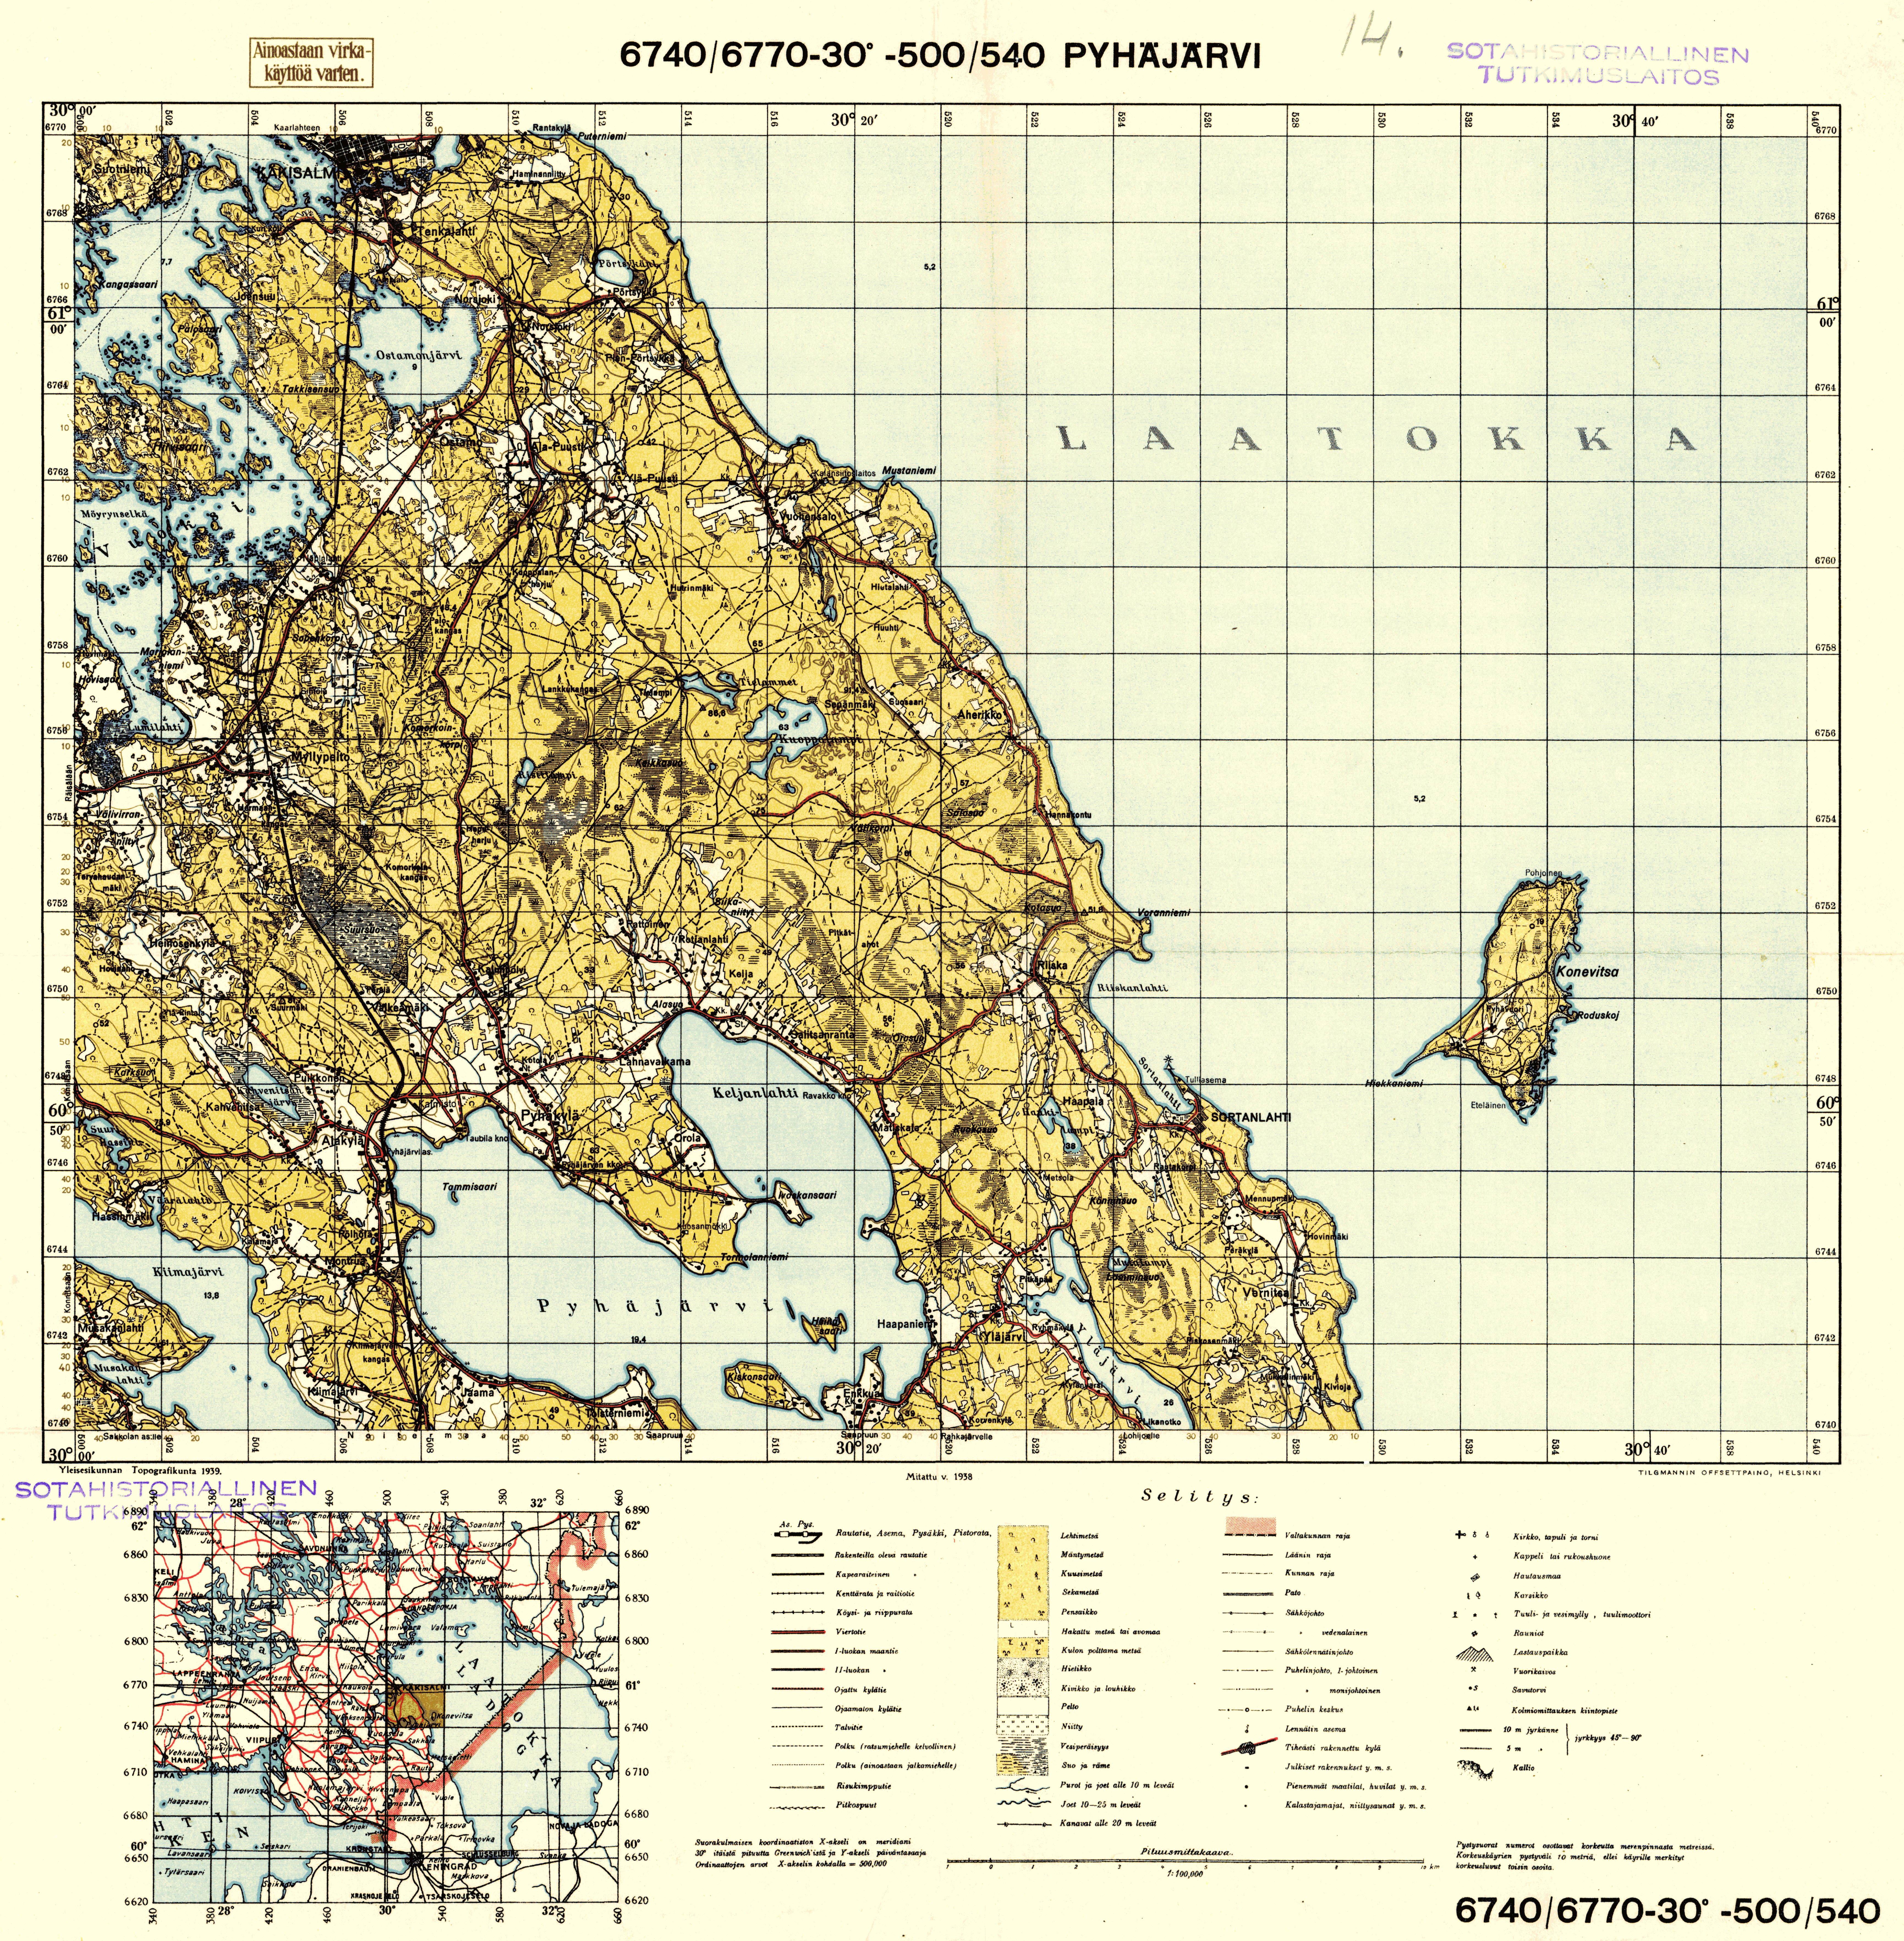 Plodovoje. Pyhäjärvi. Topografikartta 4131. Topographic map from 1939. Use the zooming tool to explore in higher level of detail. Obtain as a quality print or high resolution image